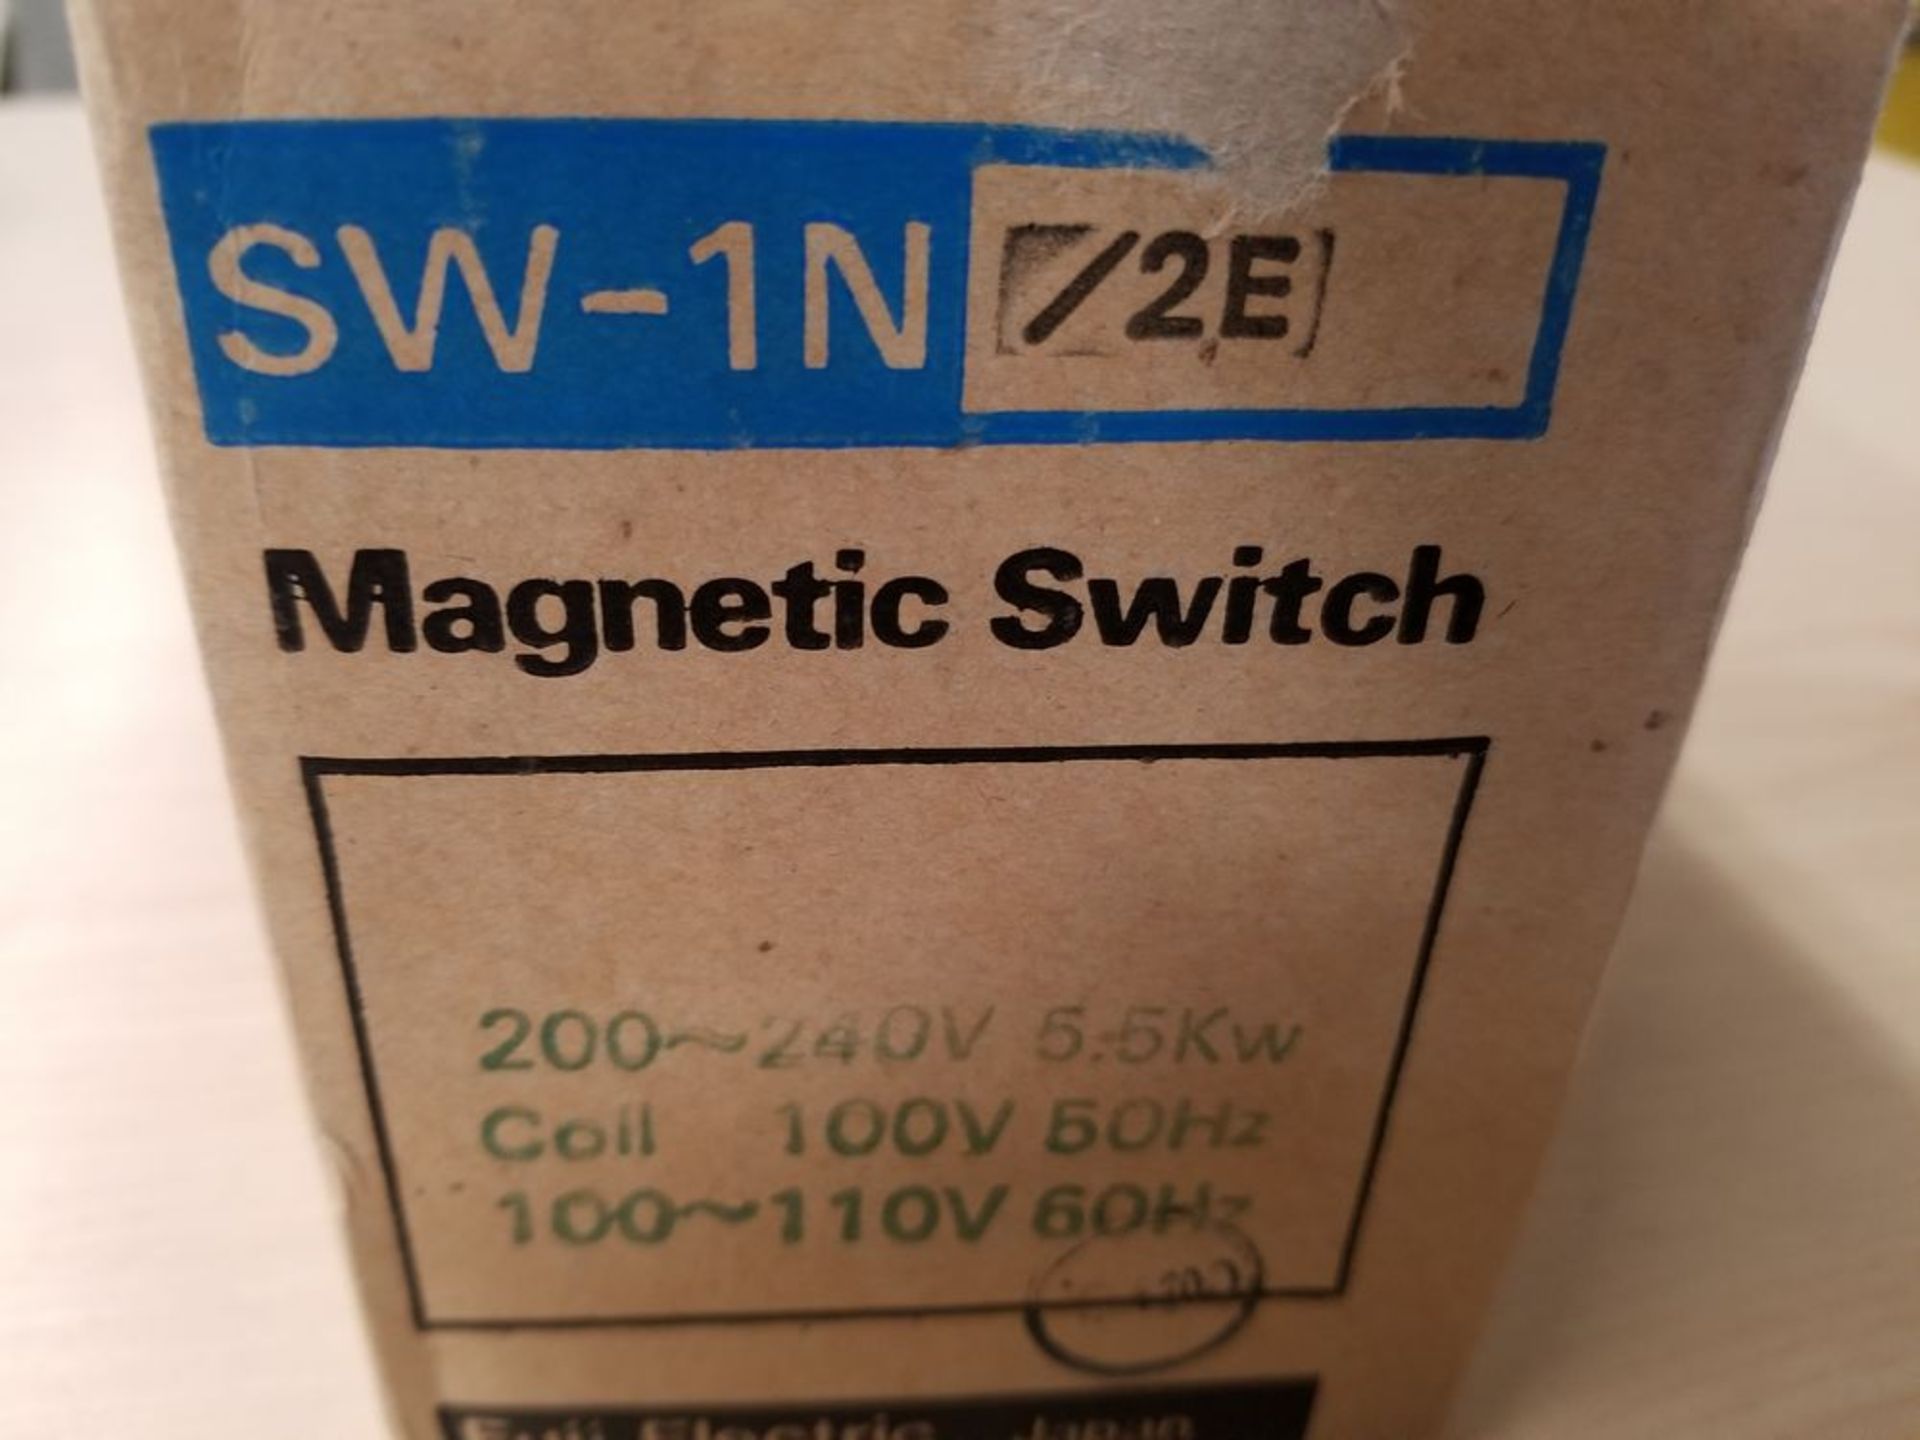 NEW FUJI SW-1N/2E MAGNETIC SWITCH - Image 2 of 3